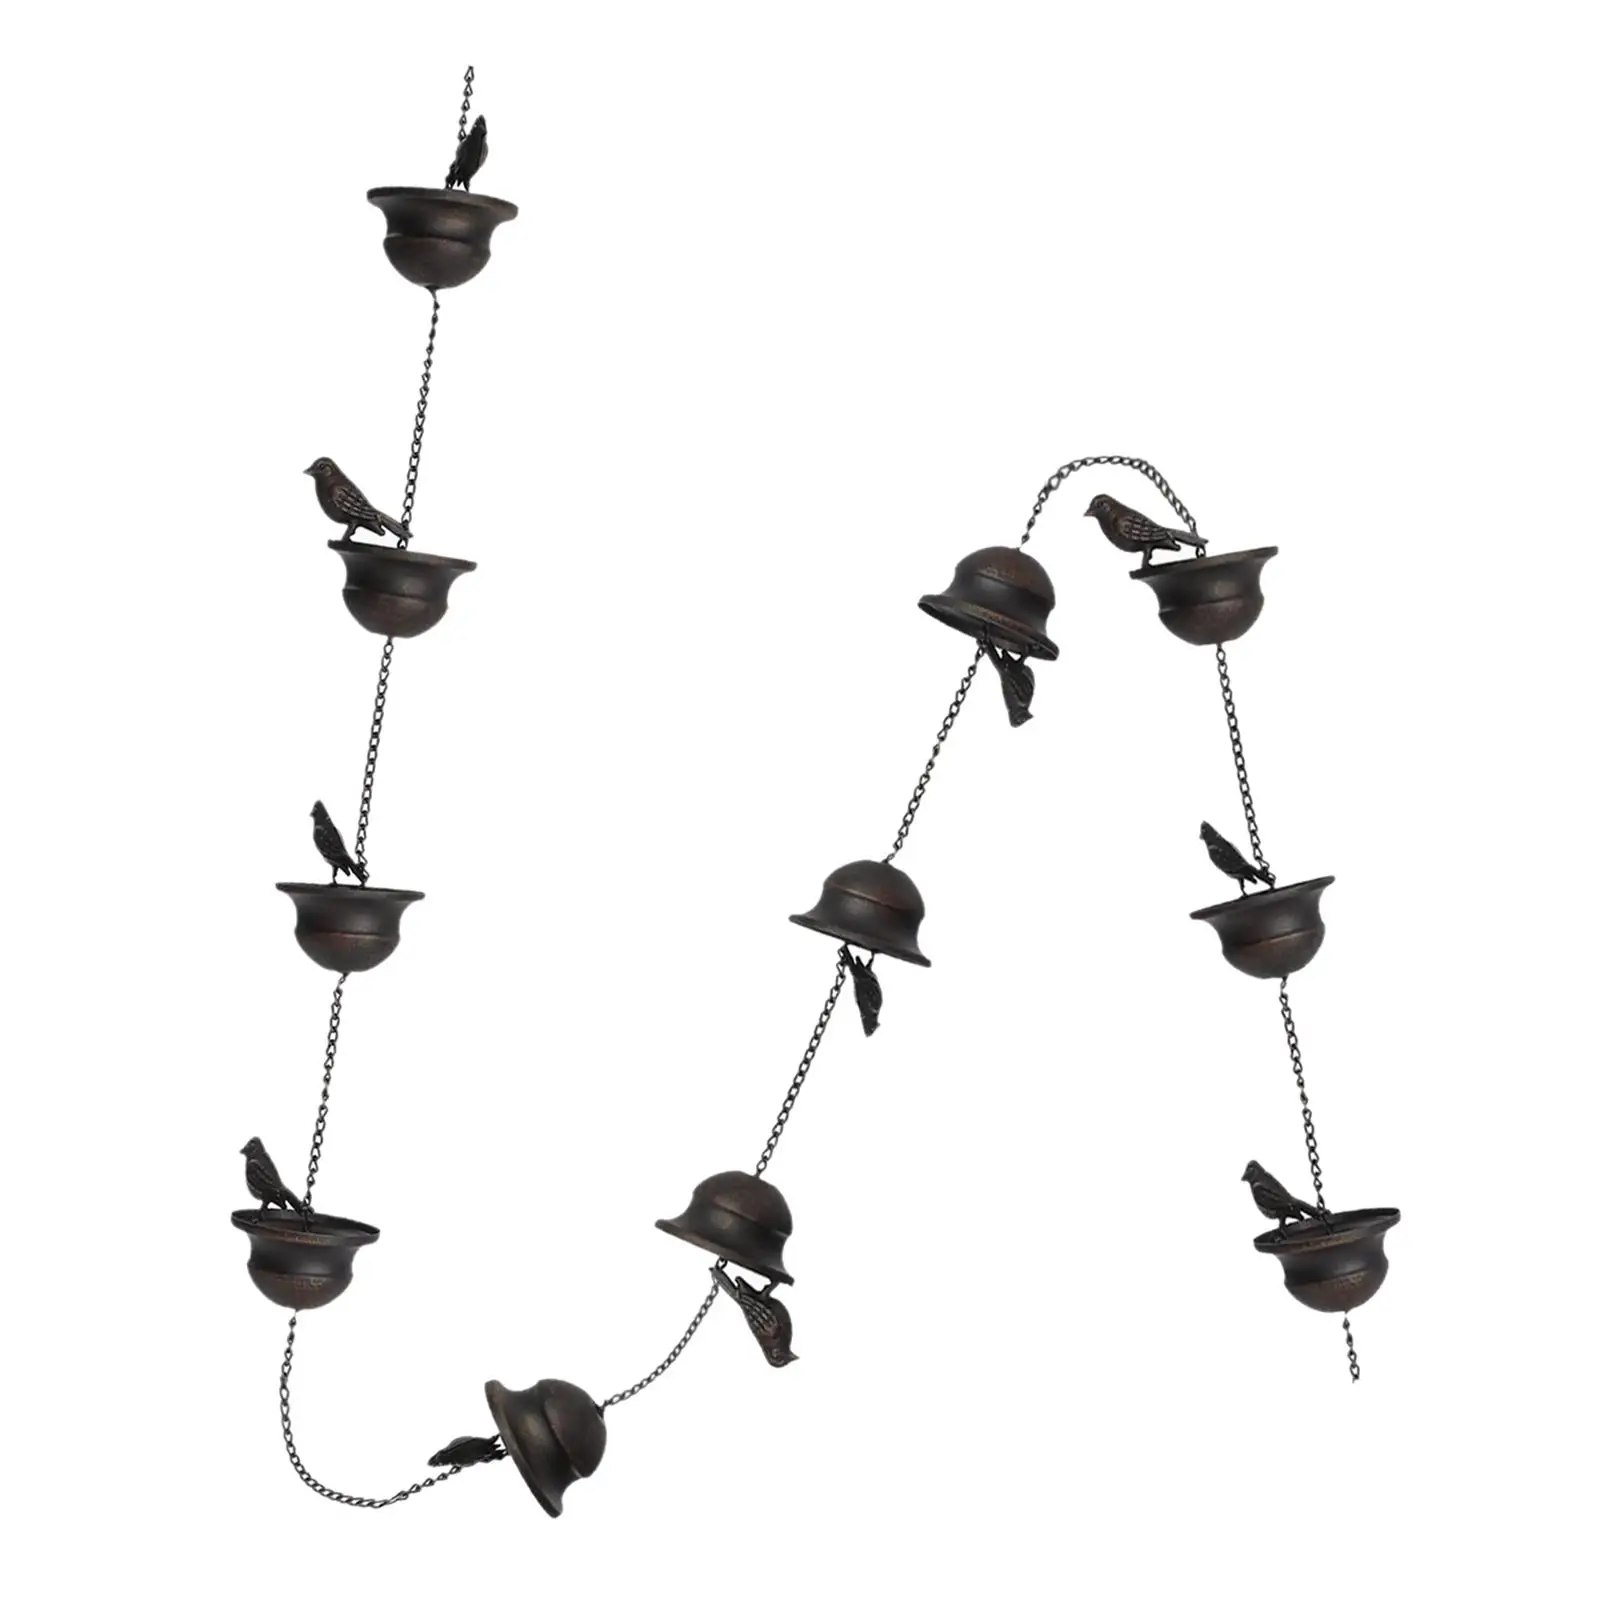 Bird Rain Chains for Gutters Replacement Downspouts Outside Rain Collector Cups 240cm for Backyard Display Garden Roofs Outdoor